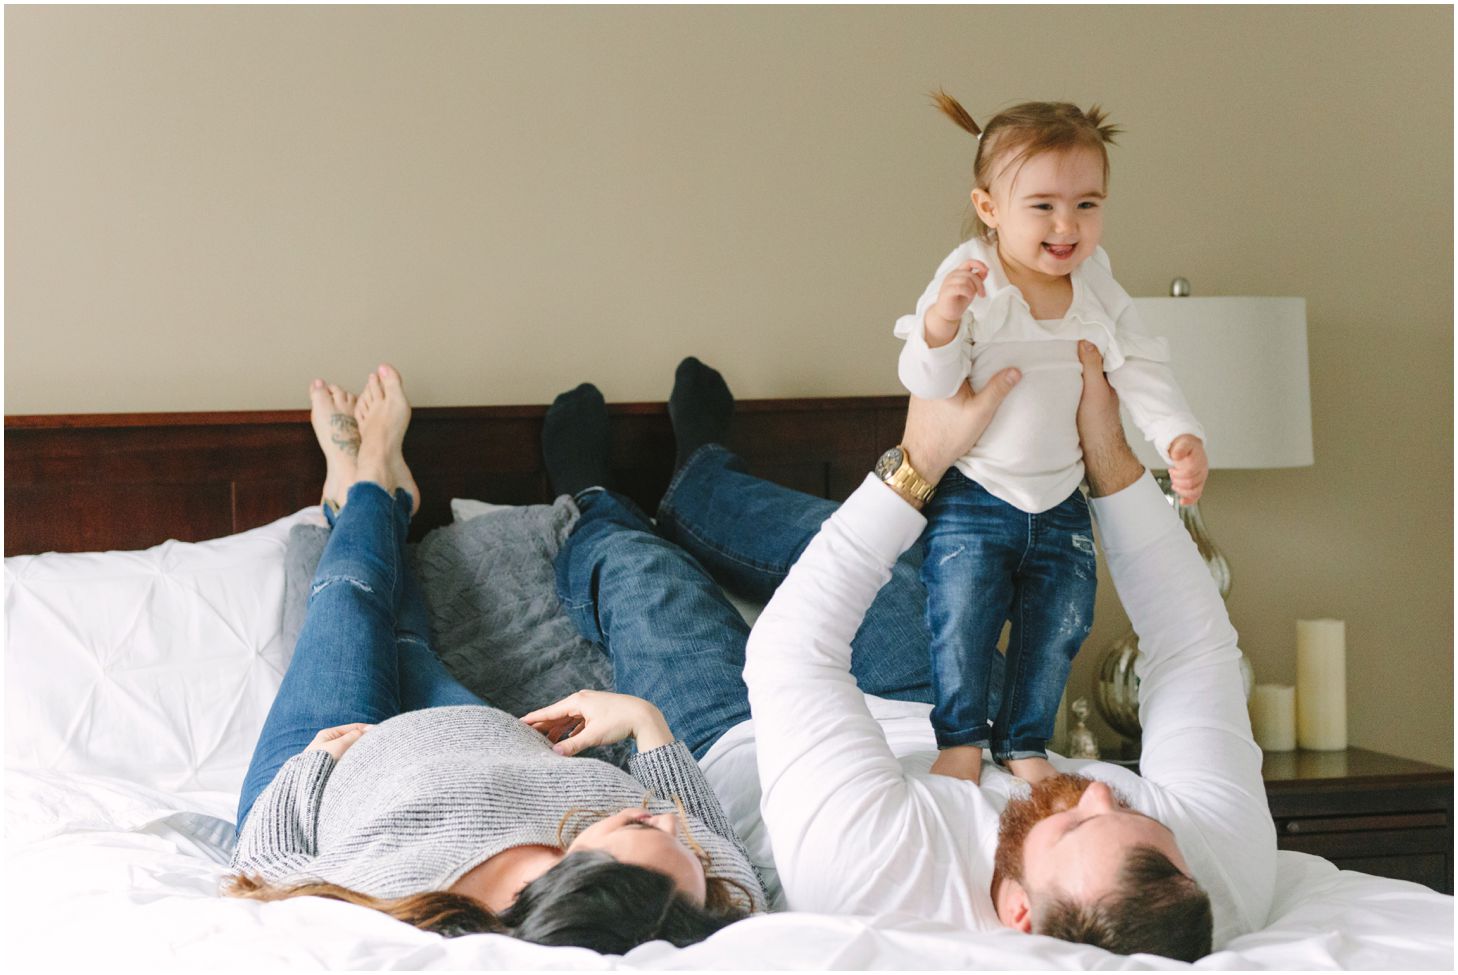 mom, dad, and little girl lay on a white bed together as dad lifts up the little girl